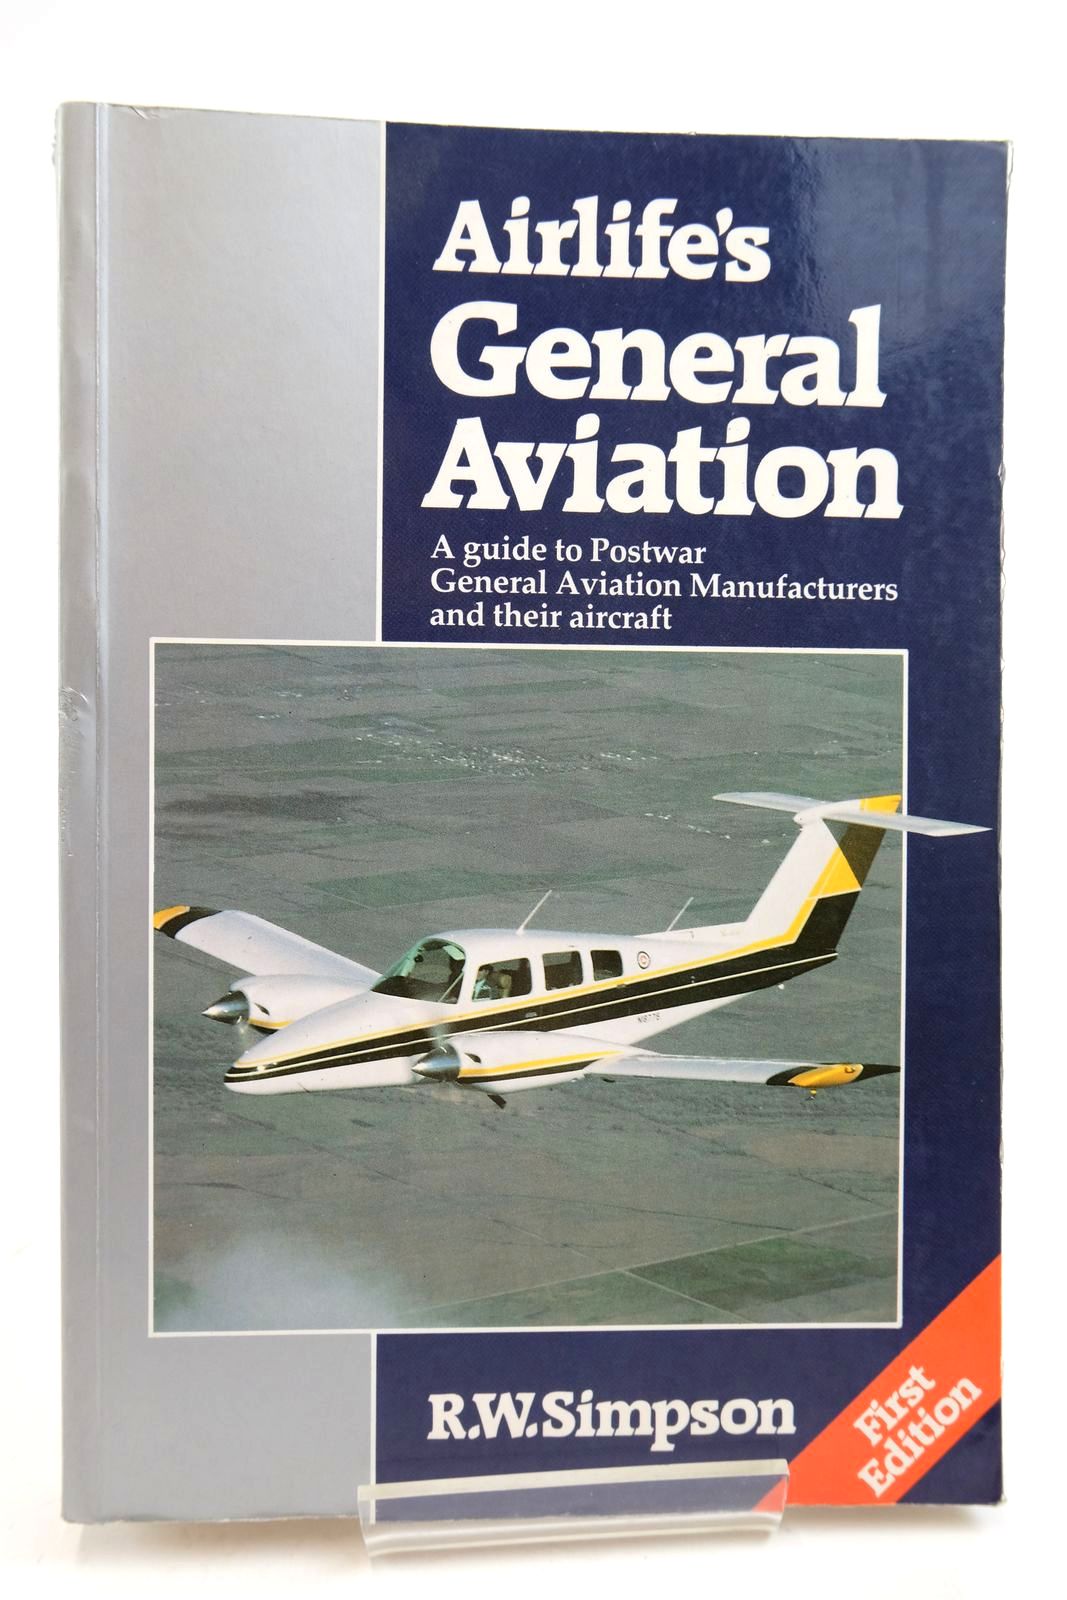 Photo of AIRLIFE'S GENERAL AVIATION: A GUIDE TO POST-WAR GENERAL AVIATION MANUFACTURERS AND THEIR AIRCRAFT written by Simpson, R.W. published by Airlife (STOCK CODE: 2139162)  for sale by Stella & Rose's Books